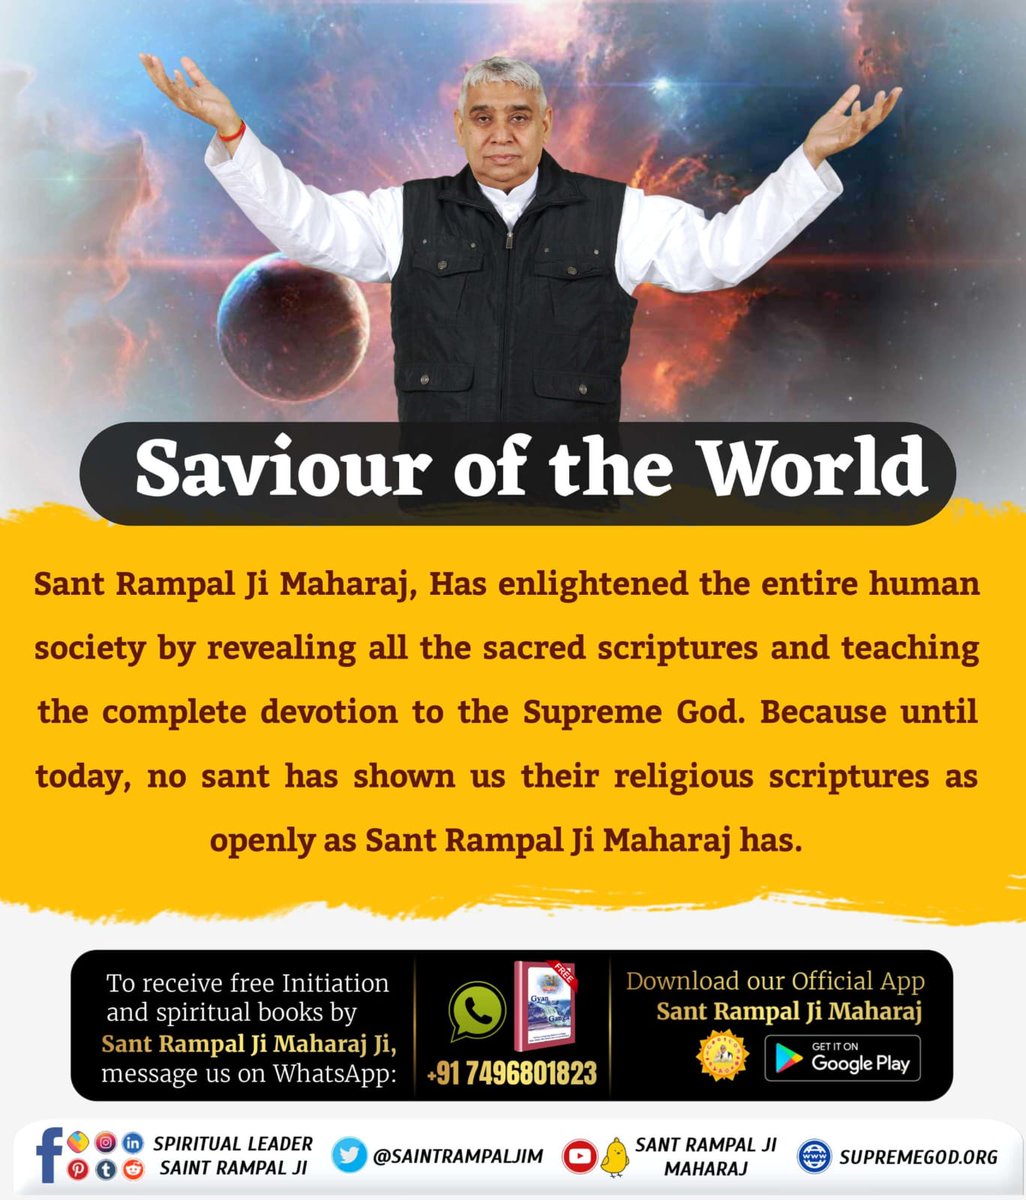 #GodMorningFriday
SAVIOUR OF THE 
WORLD

Sant Rampal Ji Maharaj, Has enlightened the entire human society by revealing all the sacred scriptures and teaching the complete devotion to the Supreme God.
Visit Saint Rampal Ji Maharaj YouTube Channel 
#जगत_उद्धारक_संत_रामपालजी